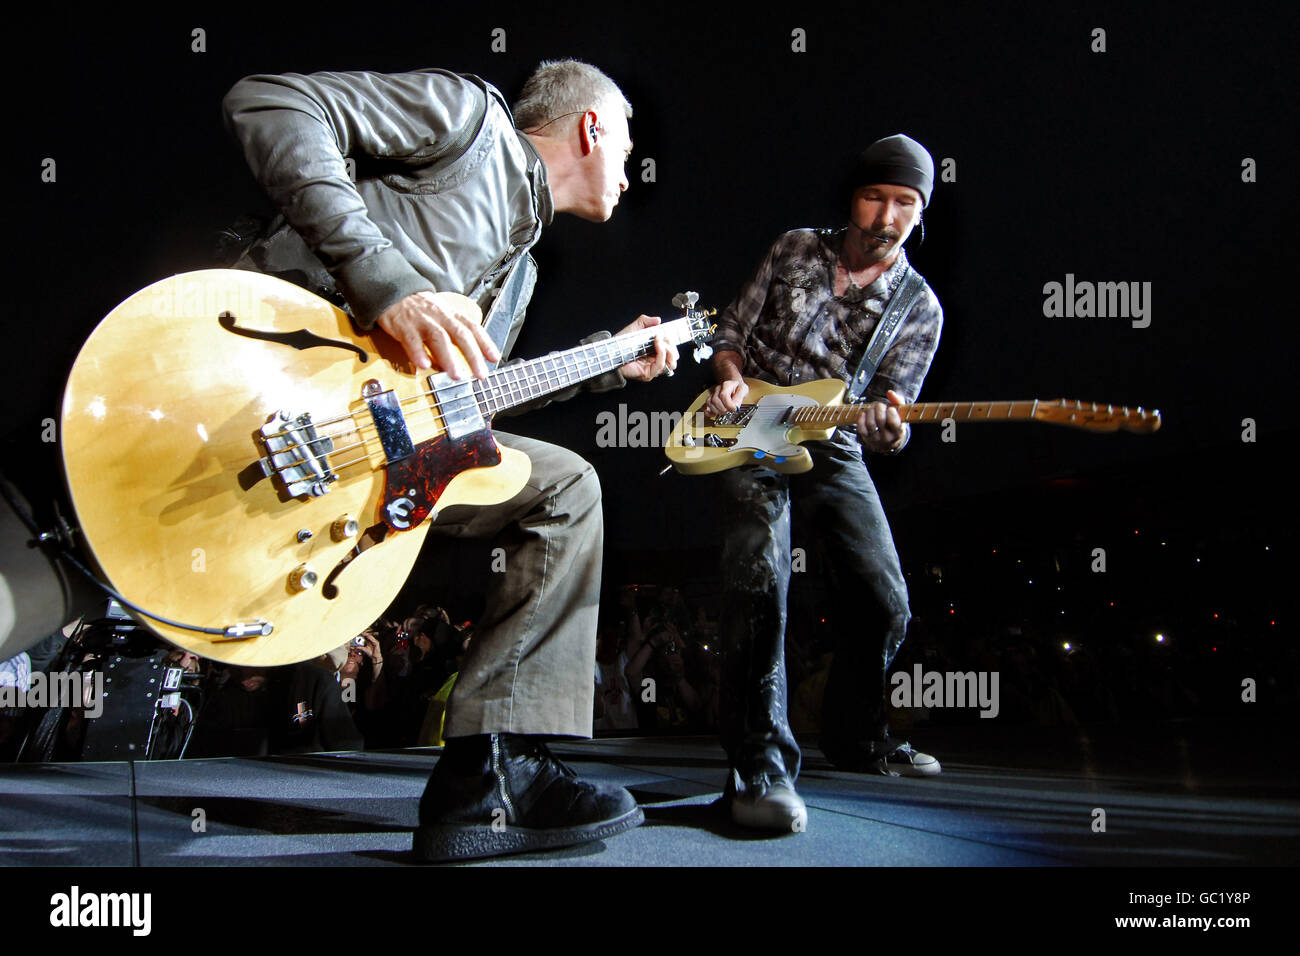 Adam Clayton (left) and The Edge of U2 perform live at the Don Valley Stadium in Sheffield as part of their 360 Degree Tour. Stock Photo